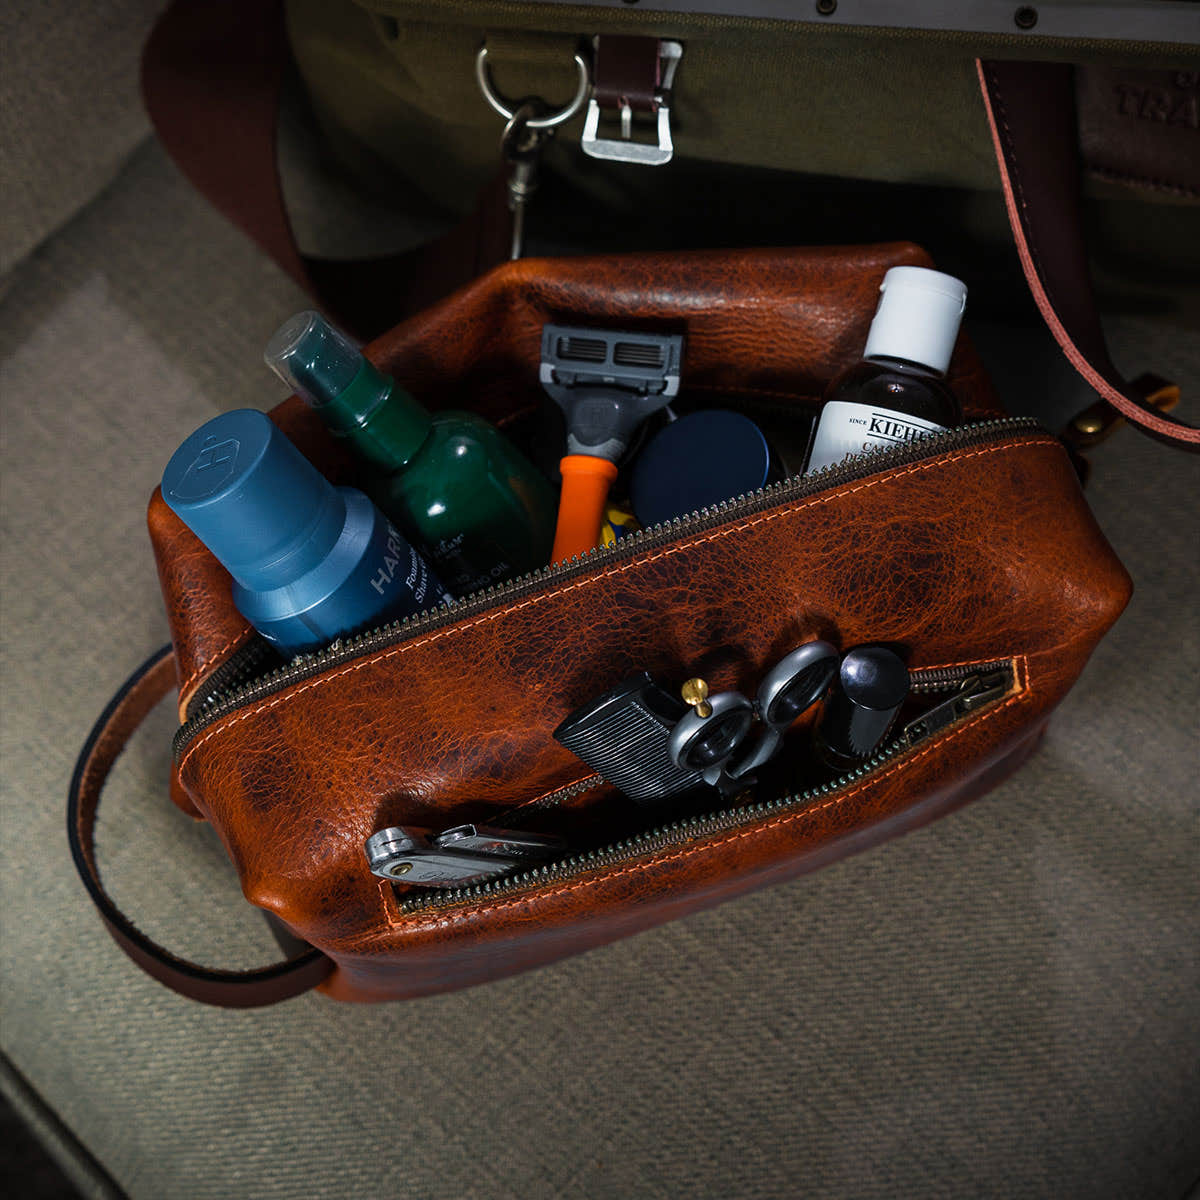 Bison Deluxe Leather Dopp Bag With Zipper